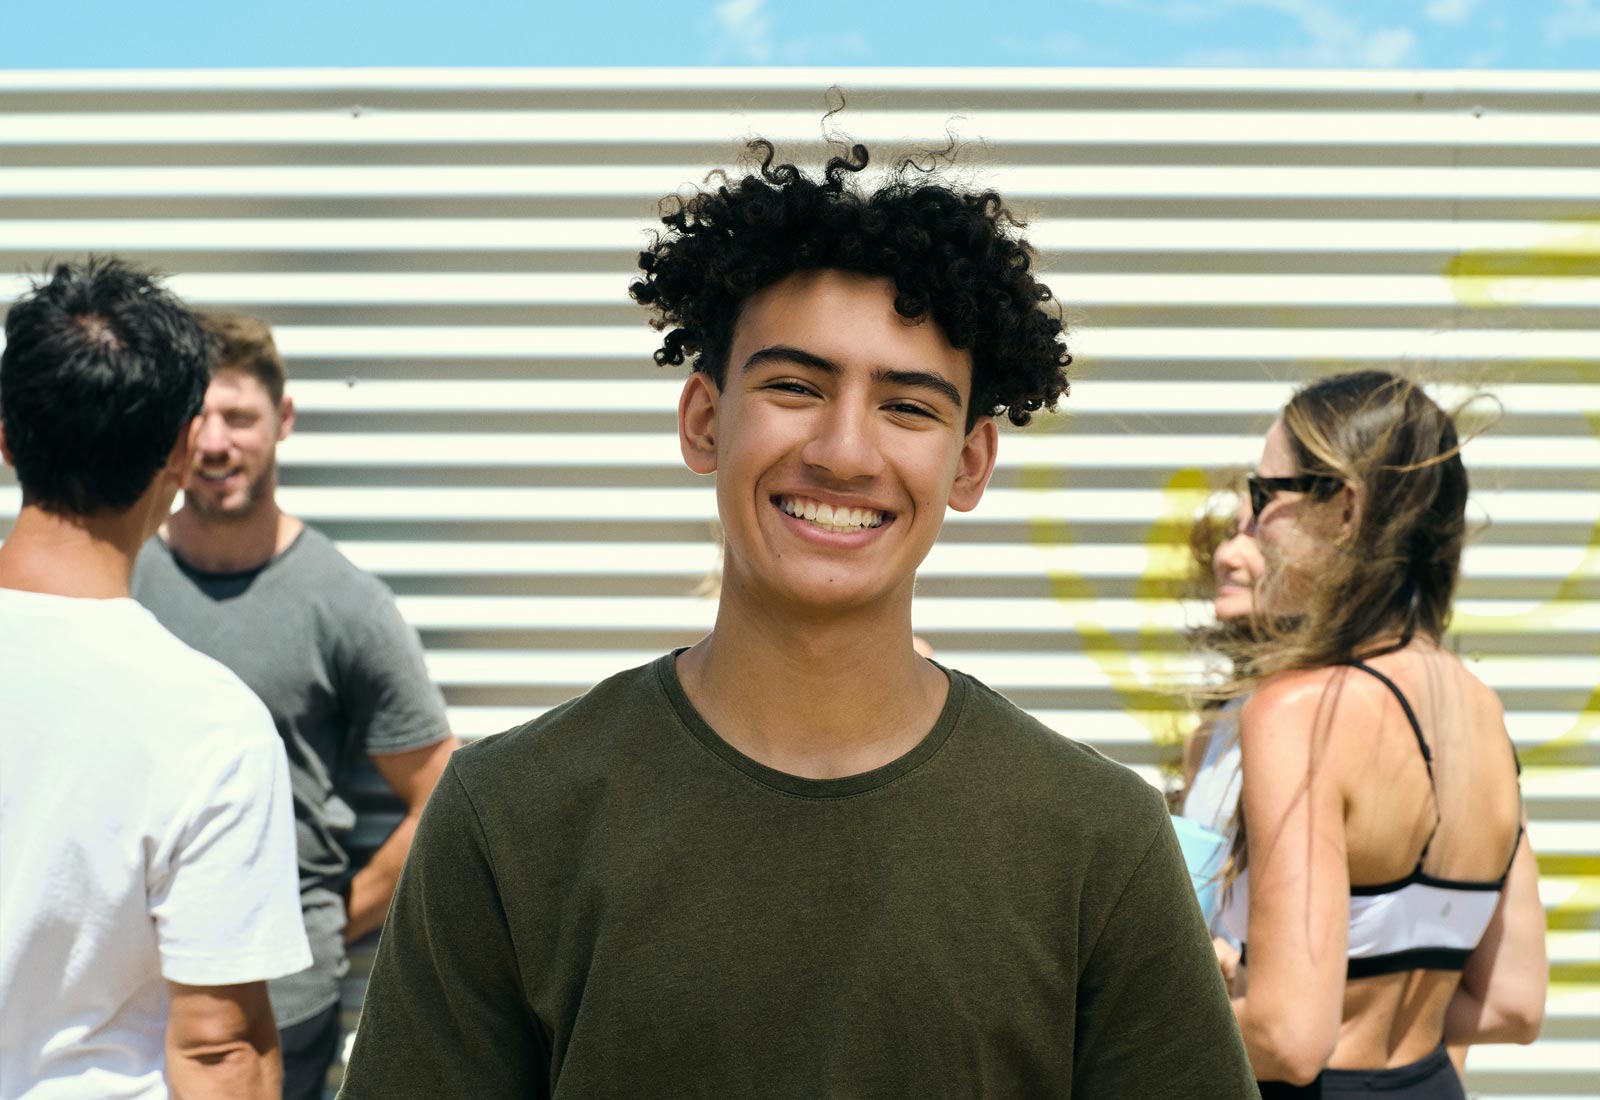 A smiling teenager stands at the forefront of the photo, men and women stand in the background in front of a Push-Up Challenge branded wall